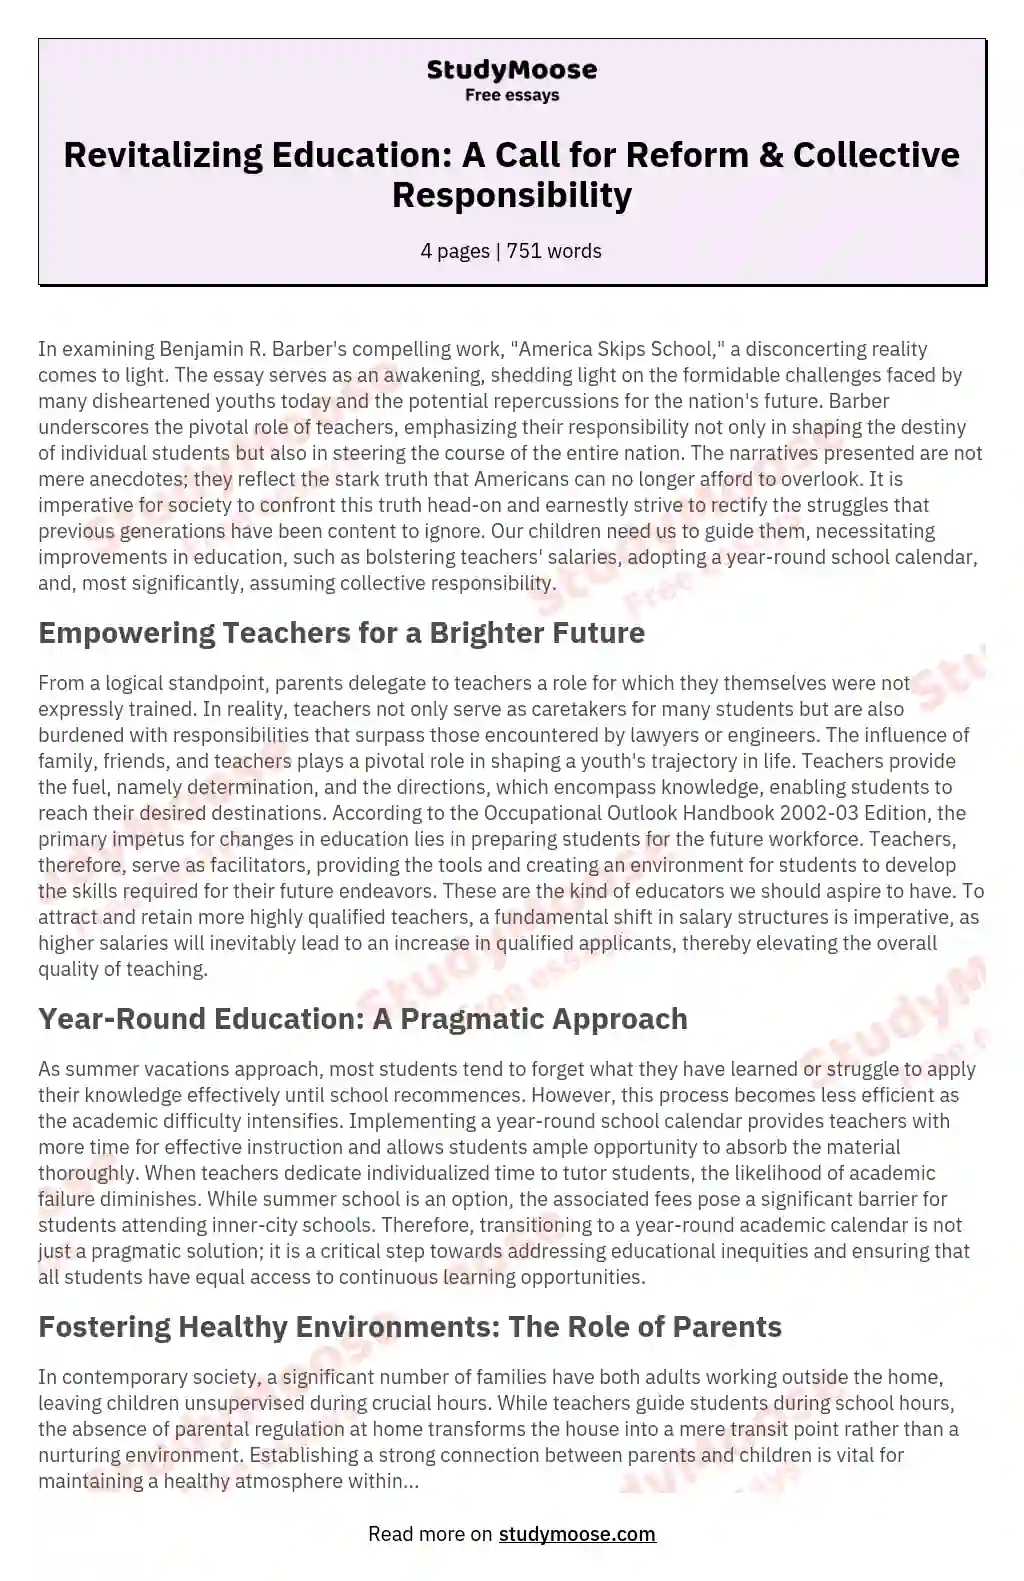 Revitalizing Education: A Call for Reform & Collective Responsibility essay